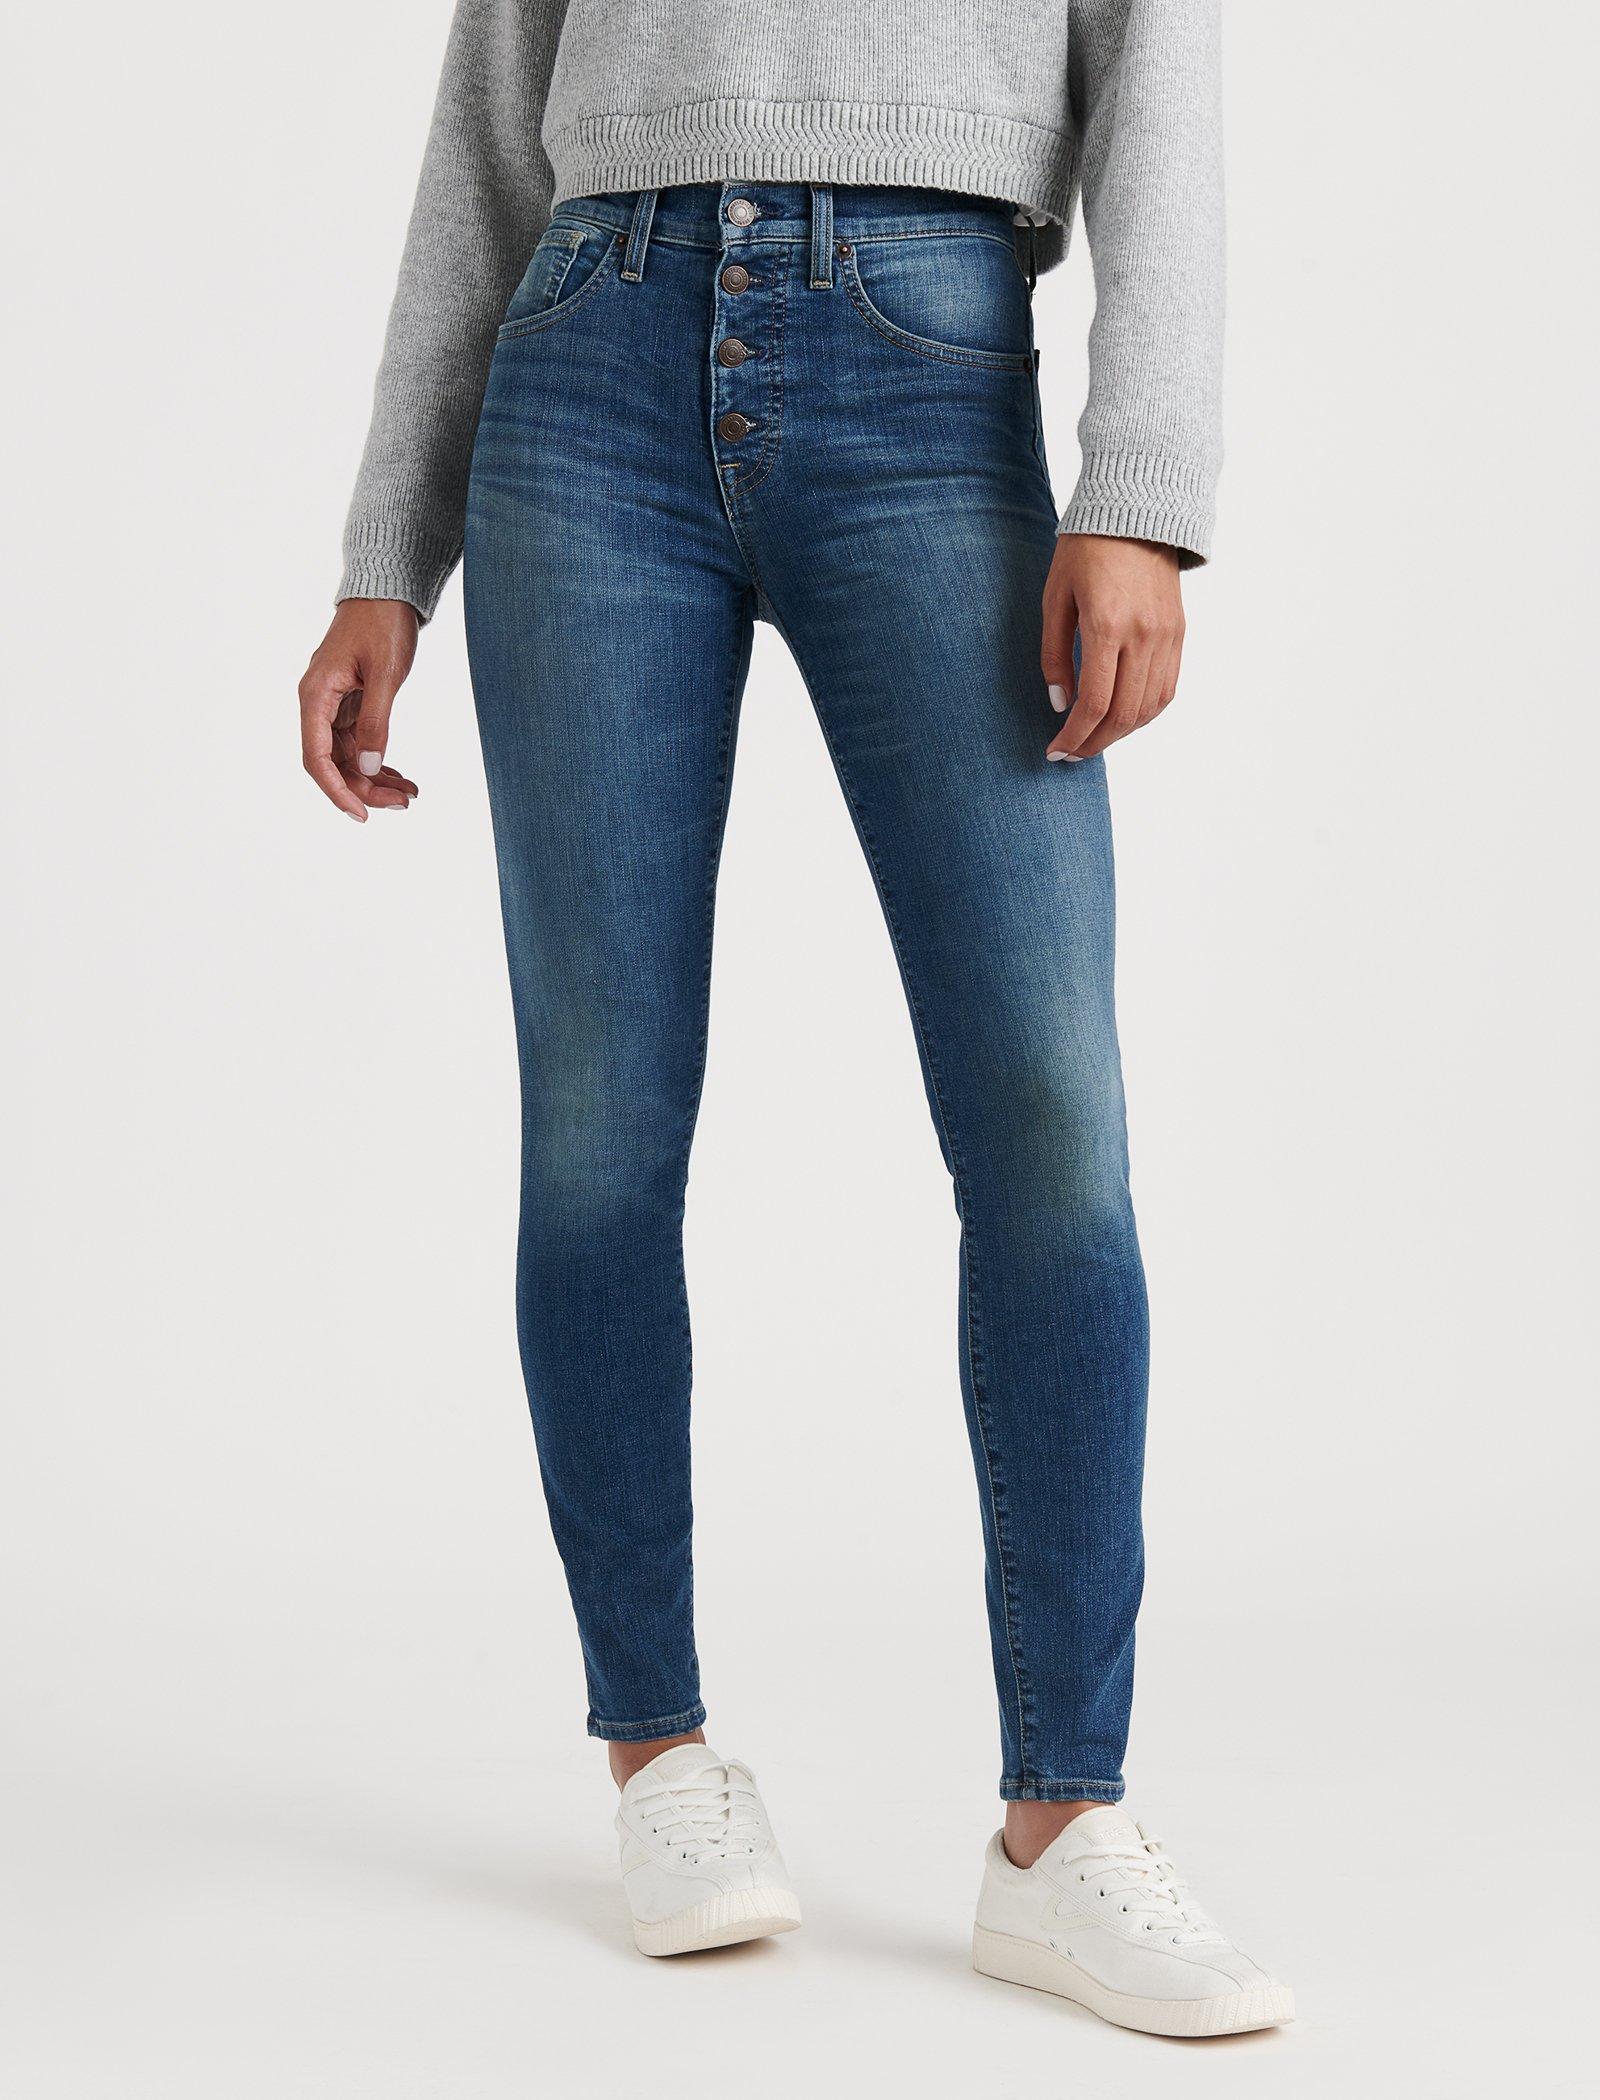 jeans lucky brand